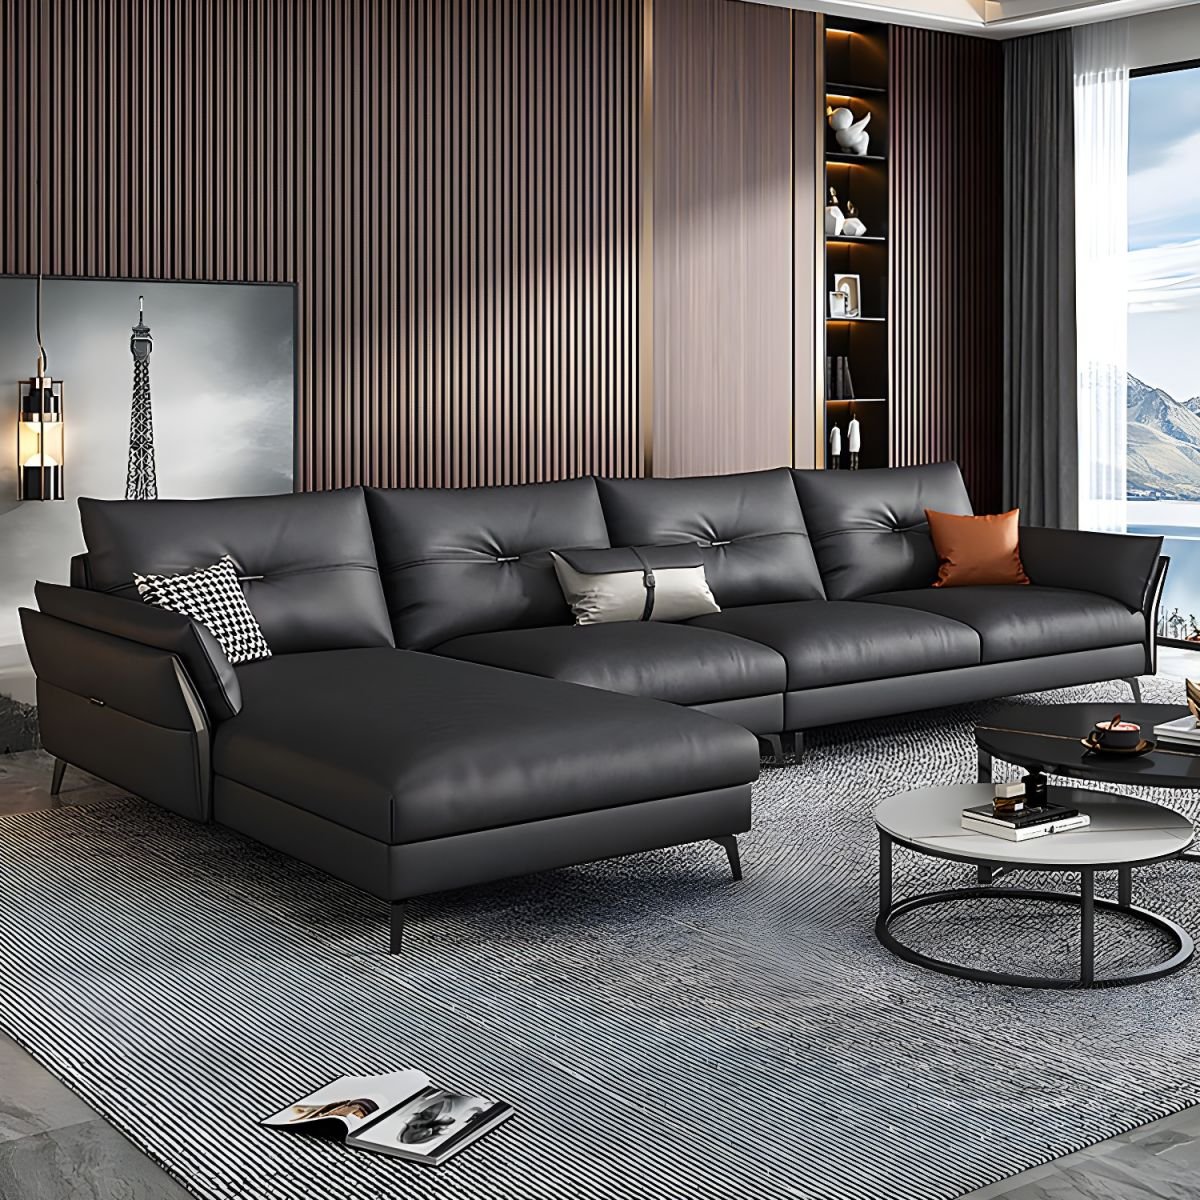 Faux Leather Modern Sectional Sofa with Flared Arm and Water Resistant - Dark Gray 126"L x 67"W x 31.5"H Tech Cloth